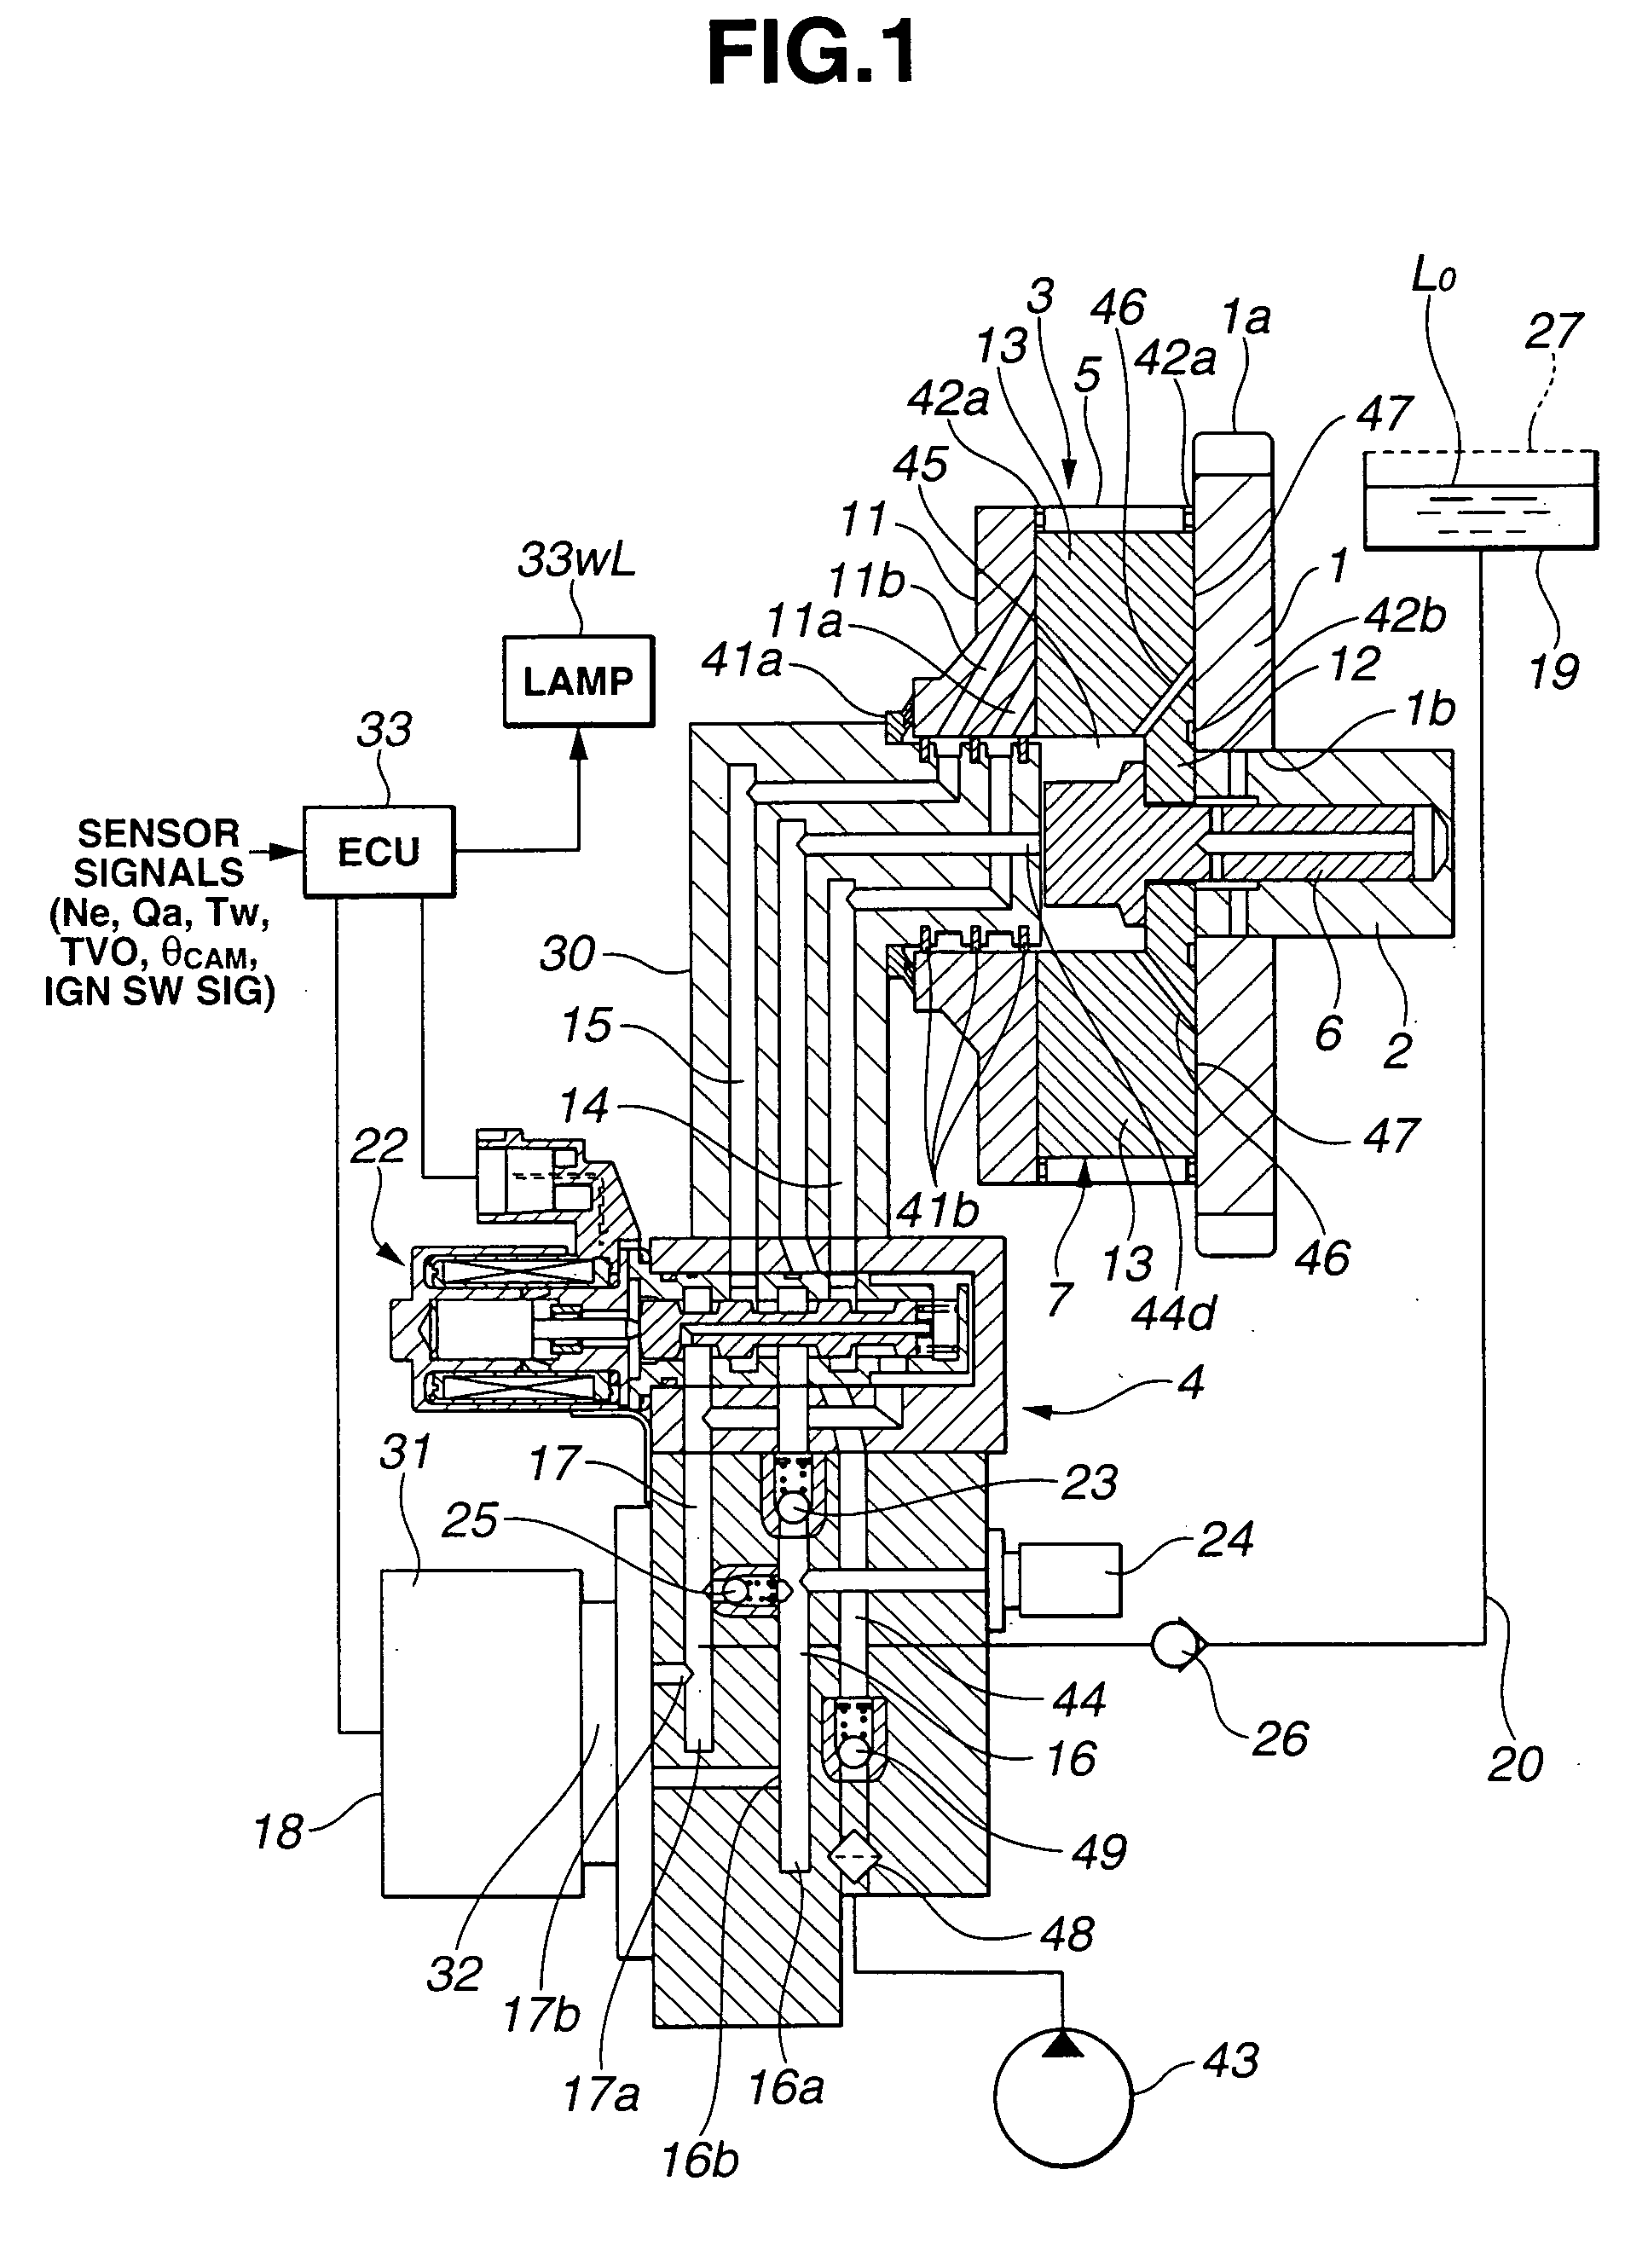 Variable valve timing control system of internal combustion engine